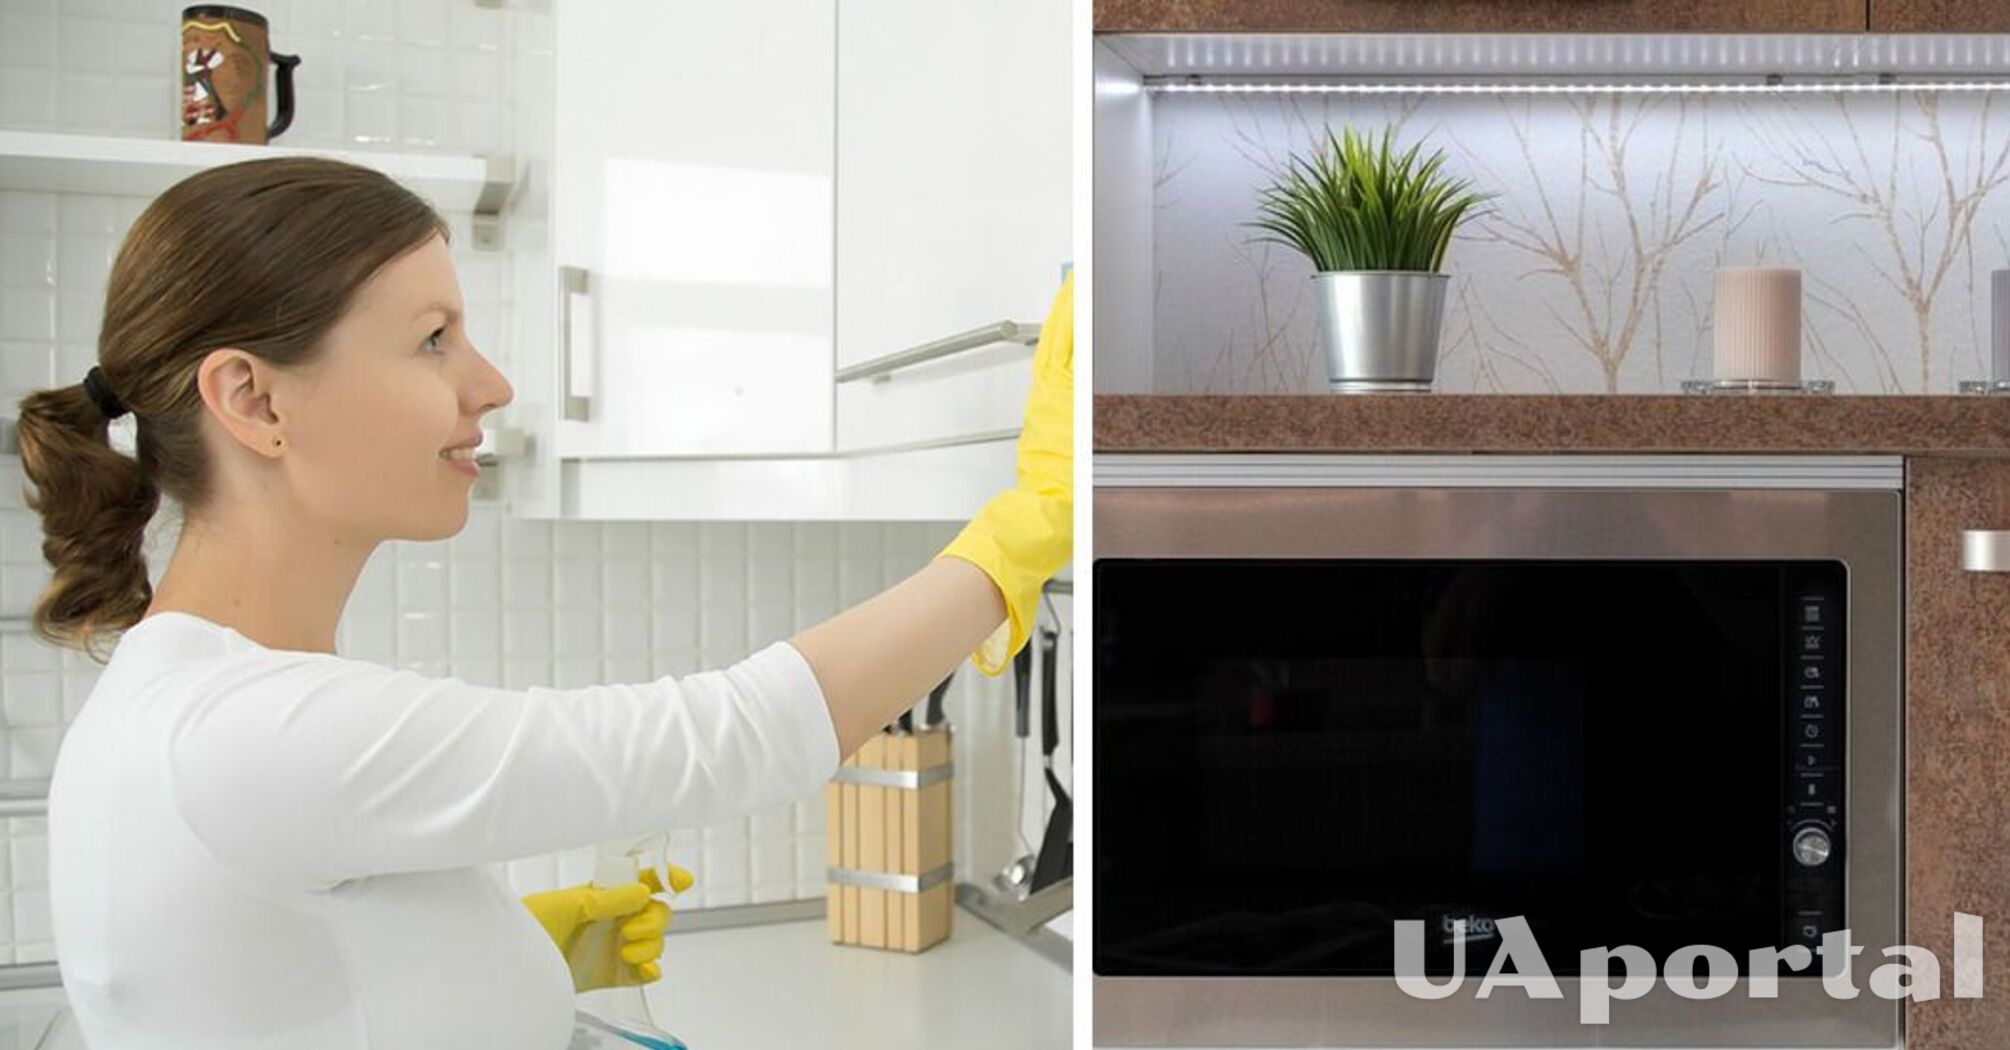 How to clean kitchen handles without chemicals quickly: an effective life hack